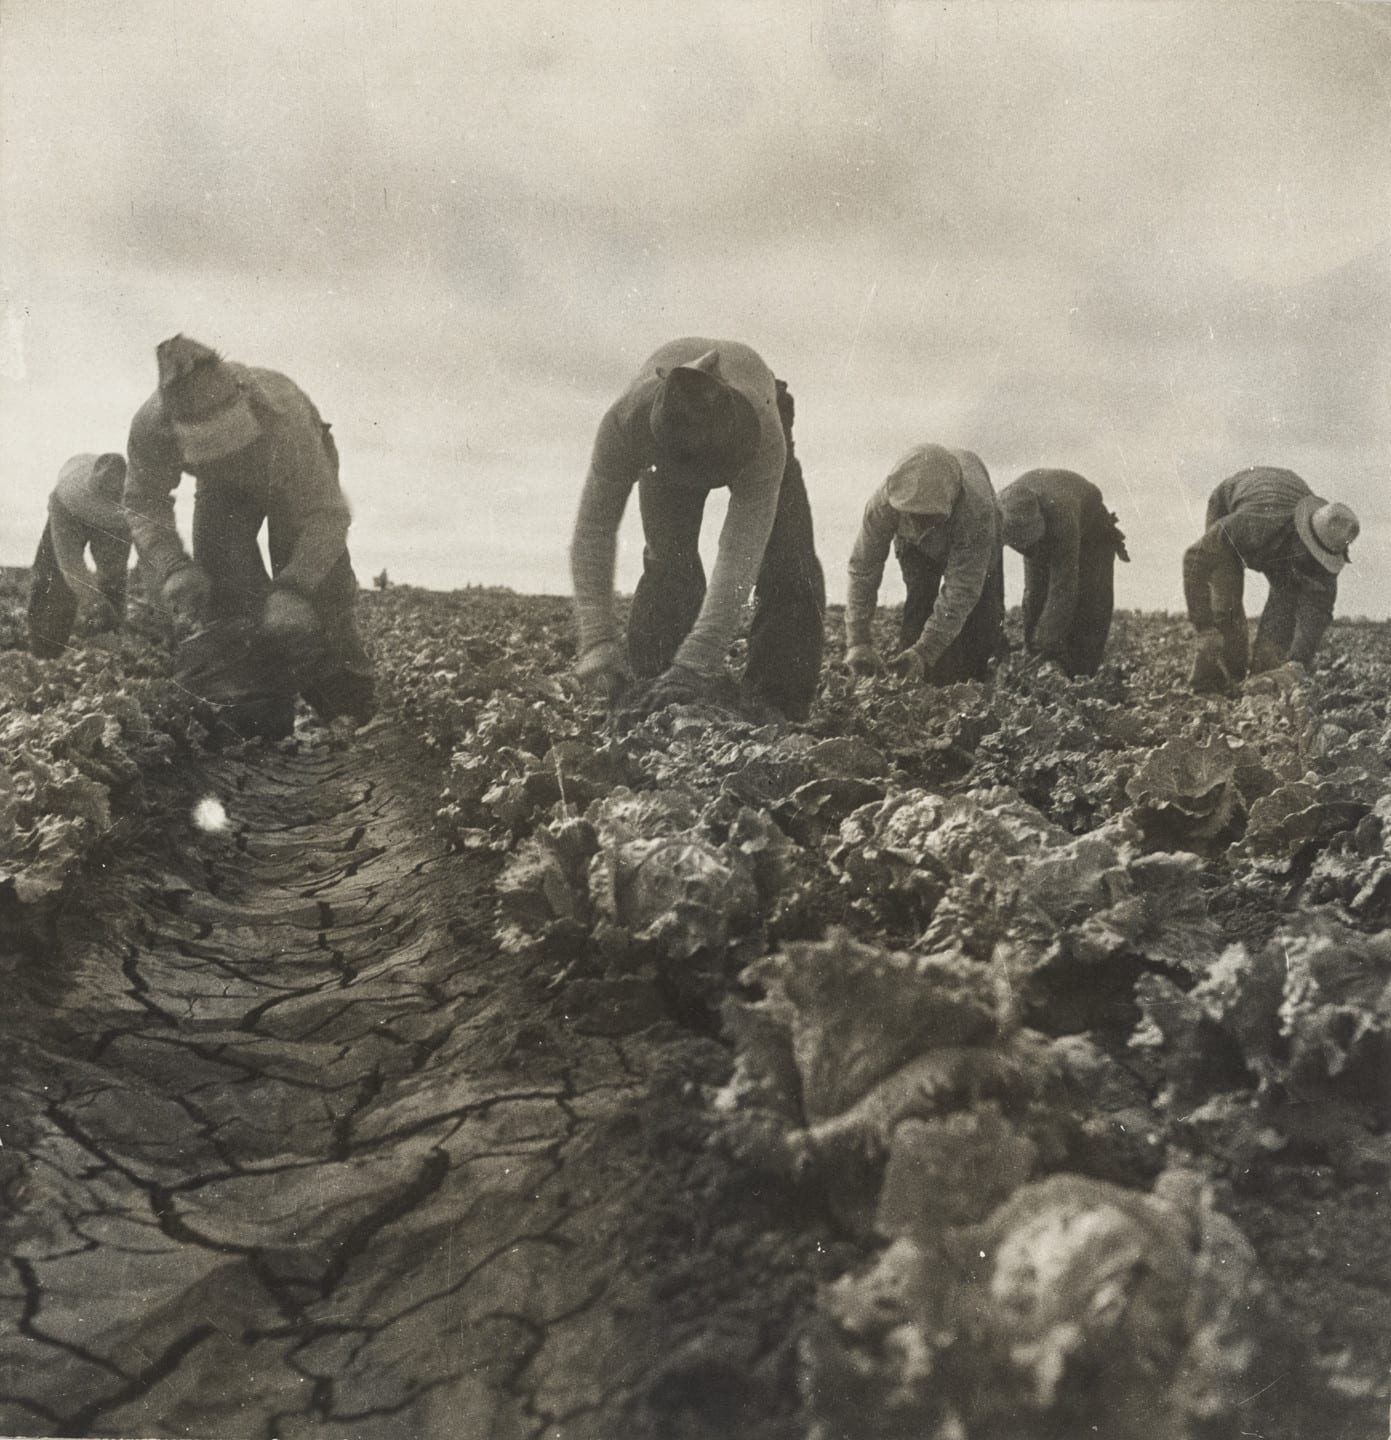 Dorothea Lange Filipinos cutting lettuce, Salinas Valley, California June 1935 black and white photograph of men leaning over field picking lettuce